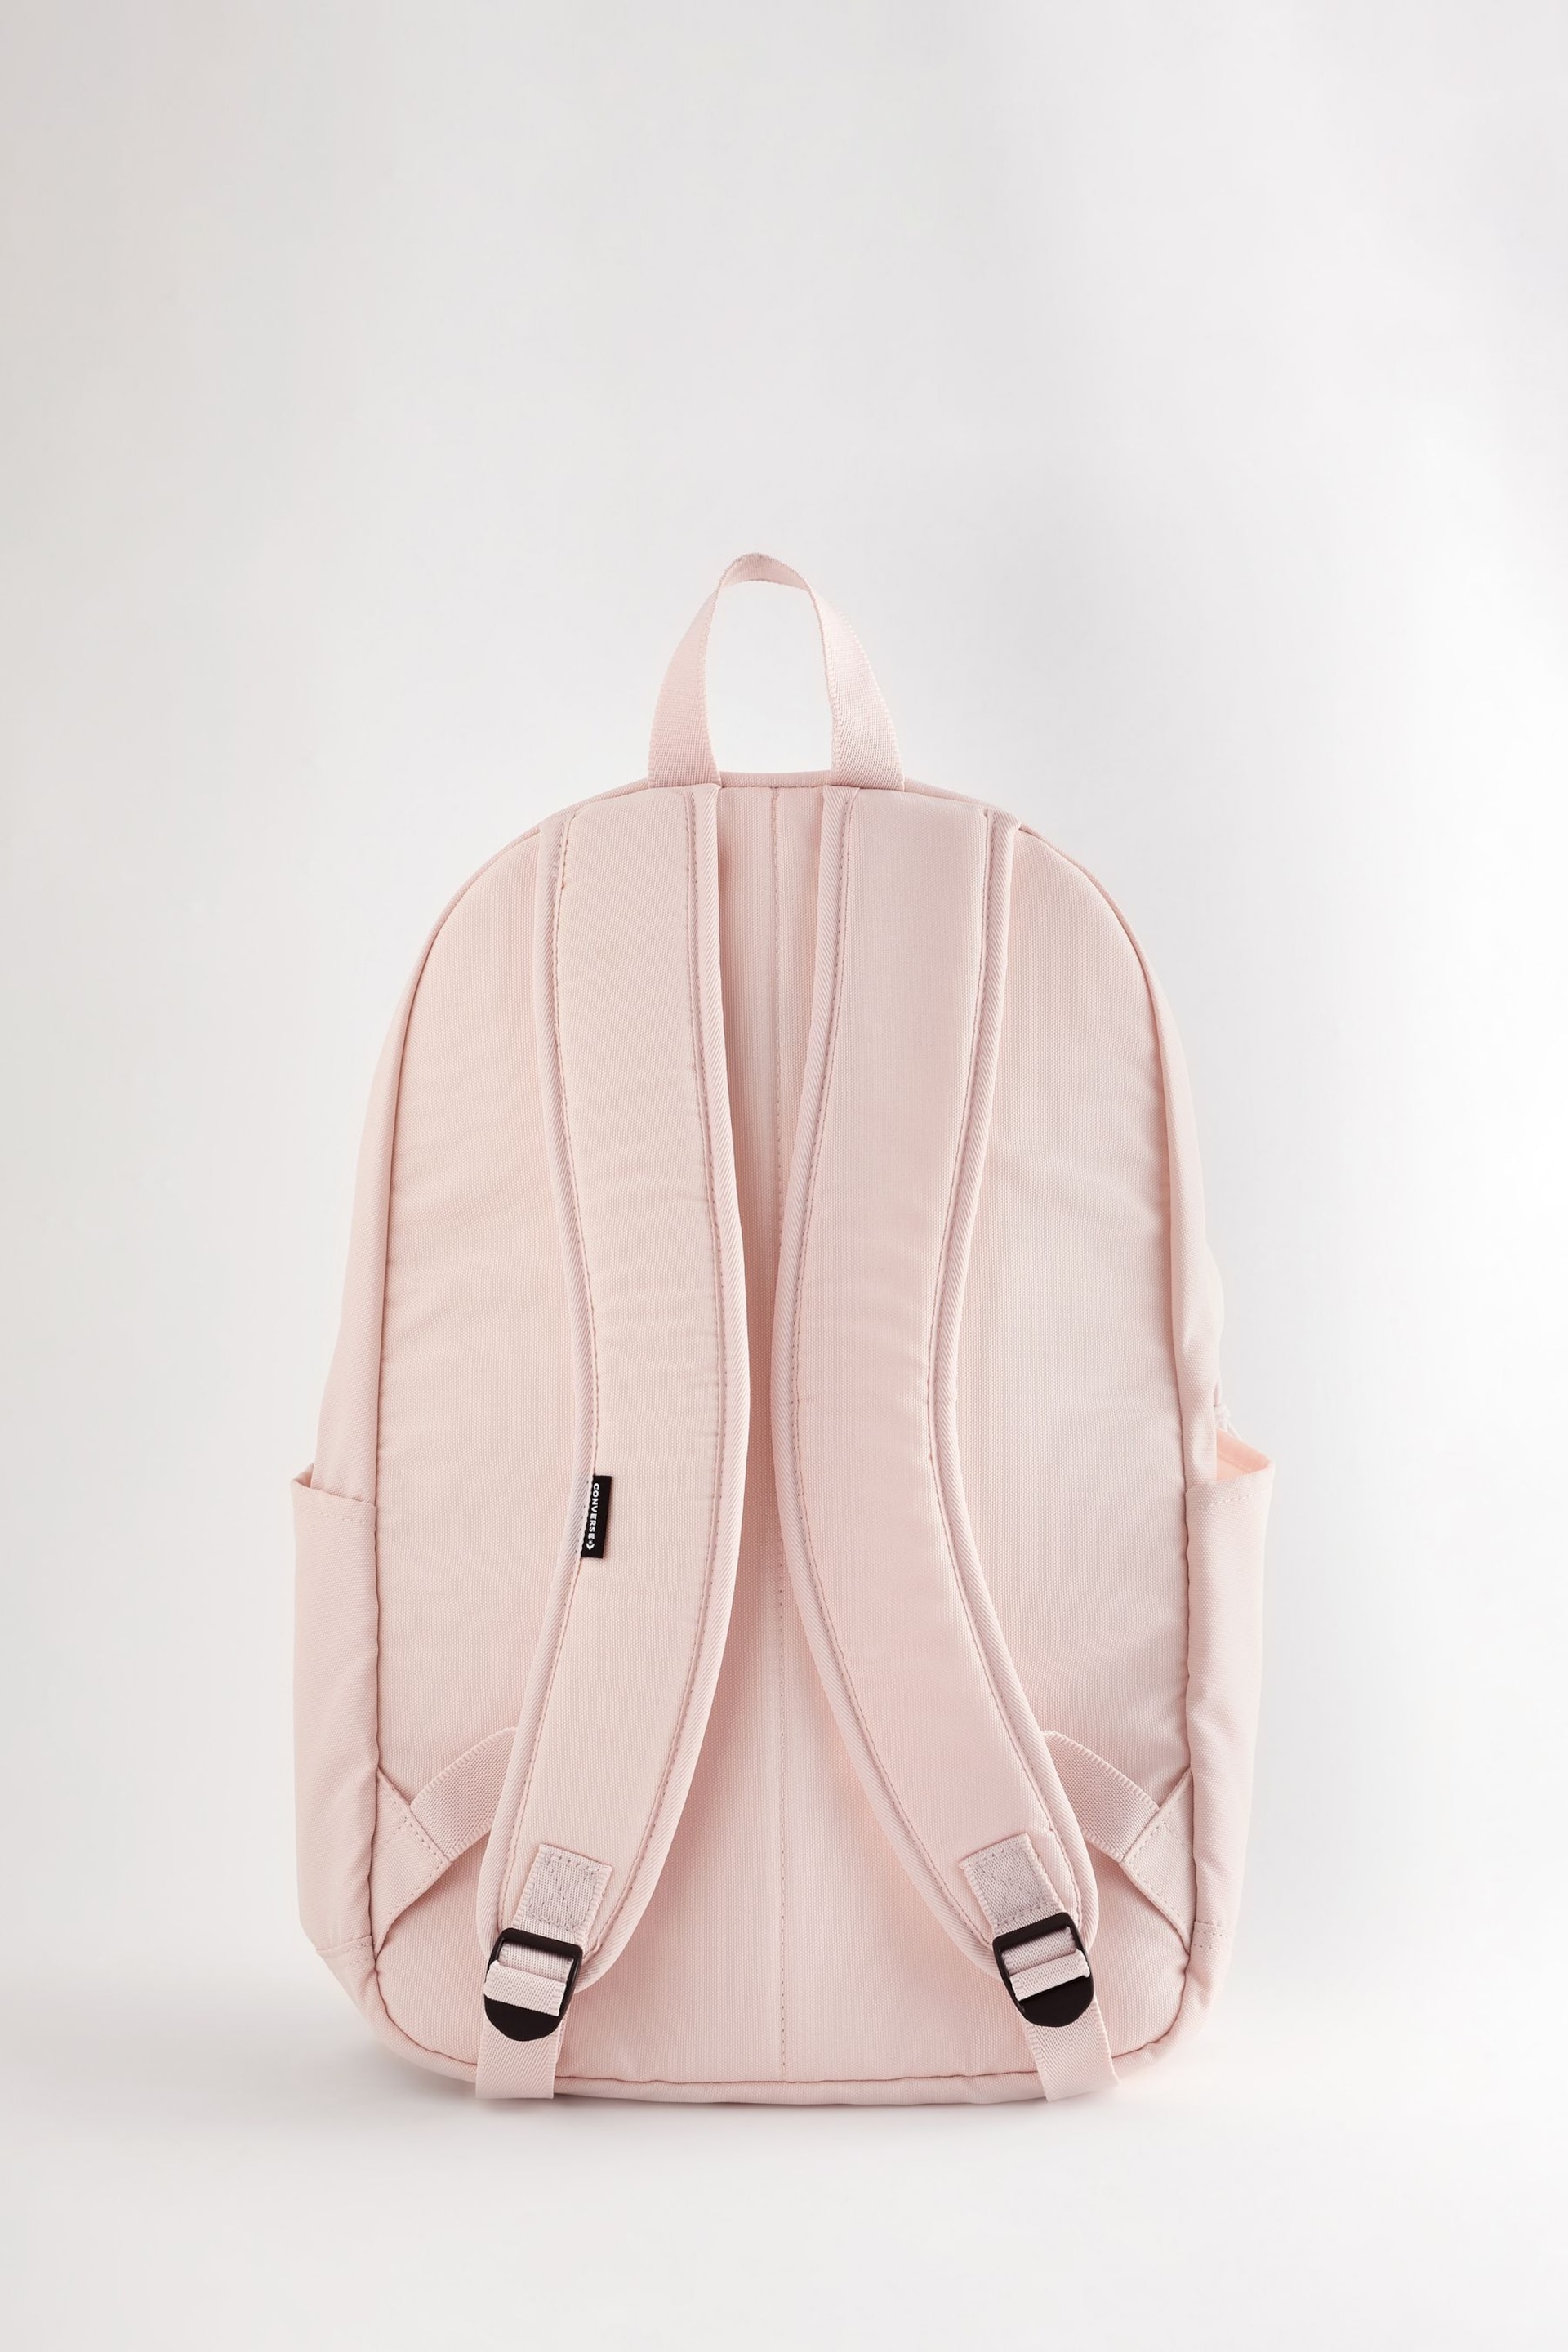 Converse Pink Converse Black Go 2 Backpack - Image 2 of 6